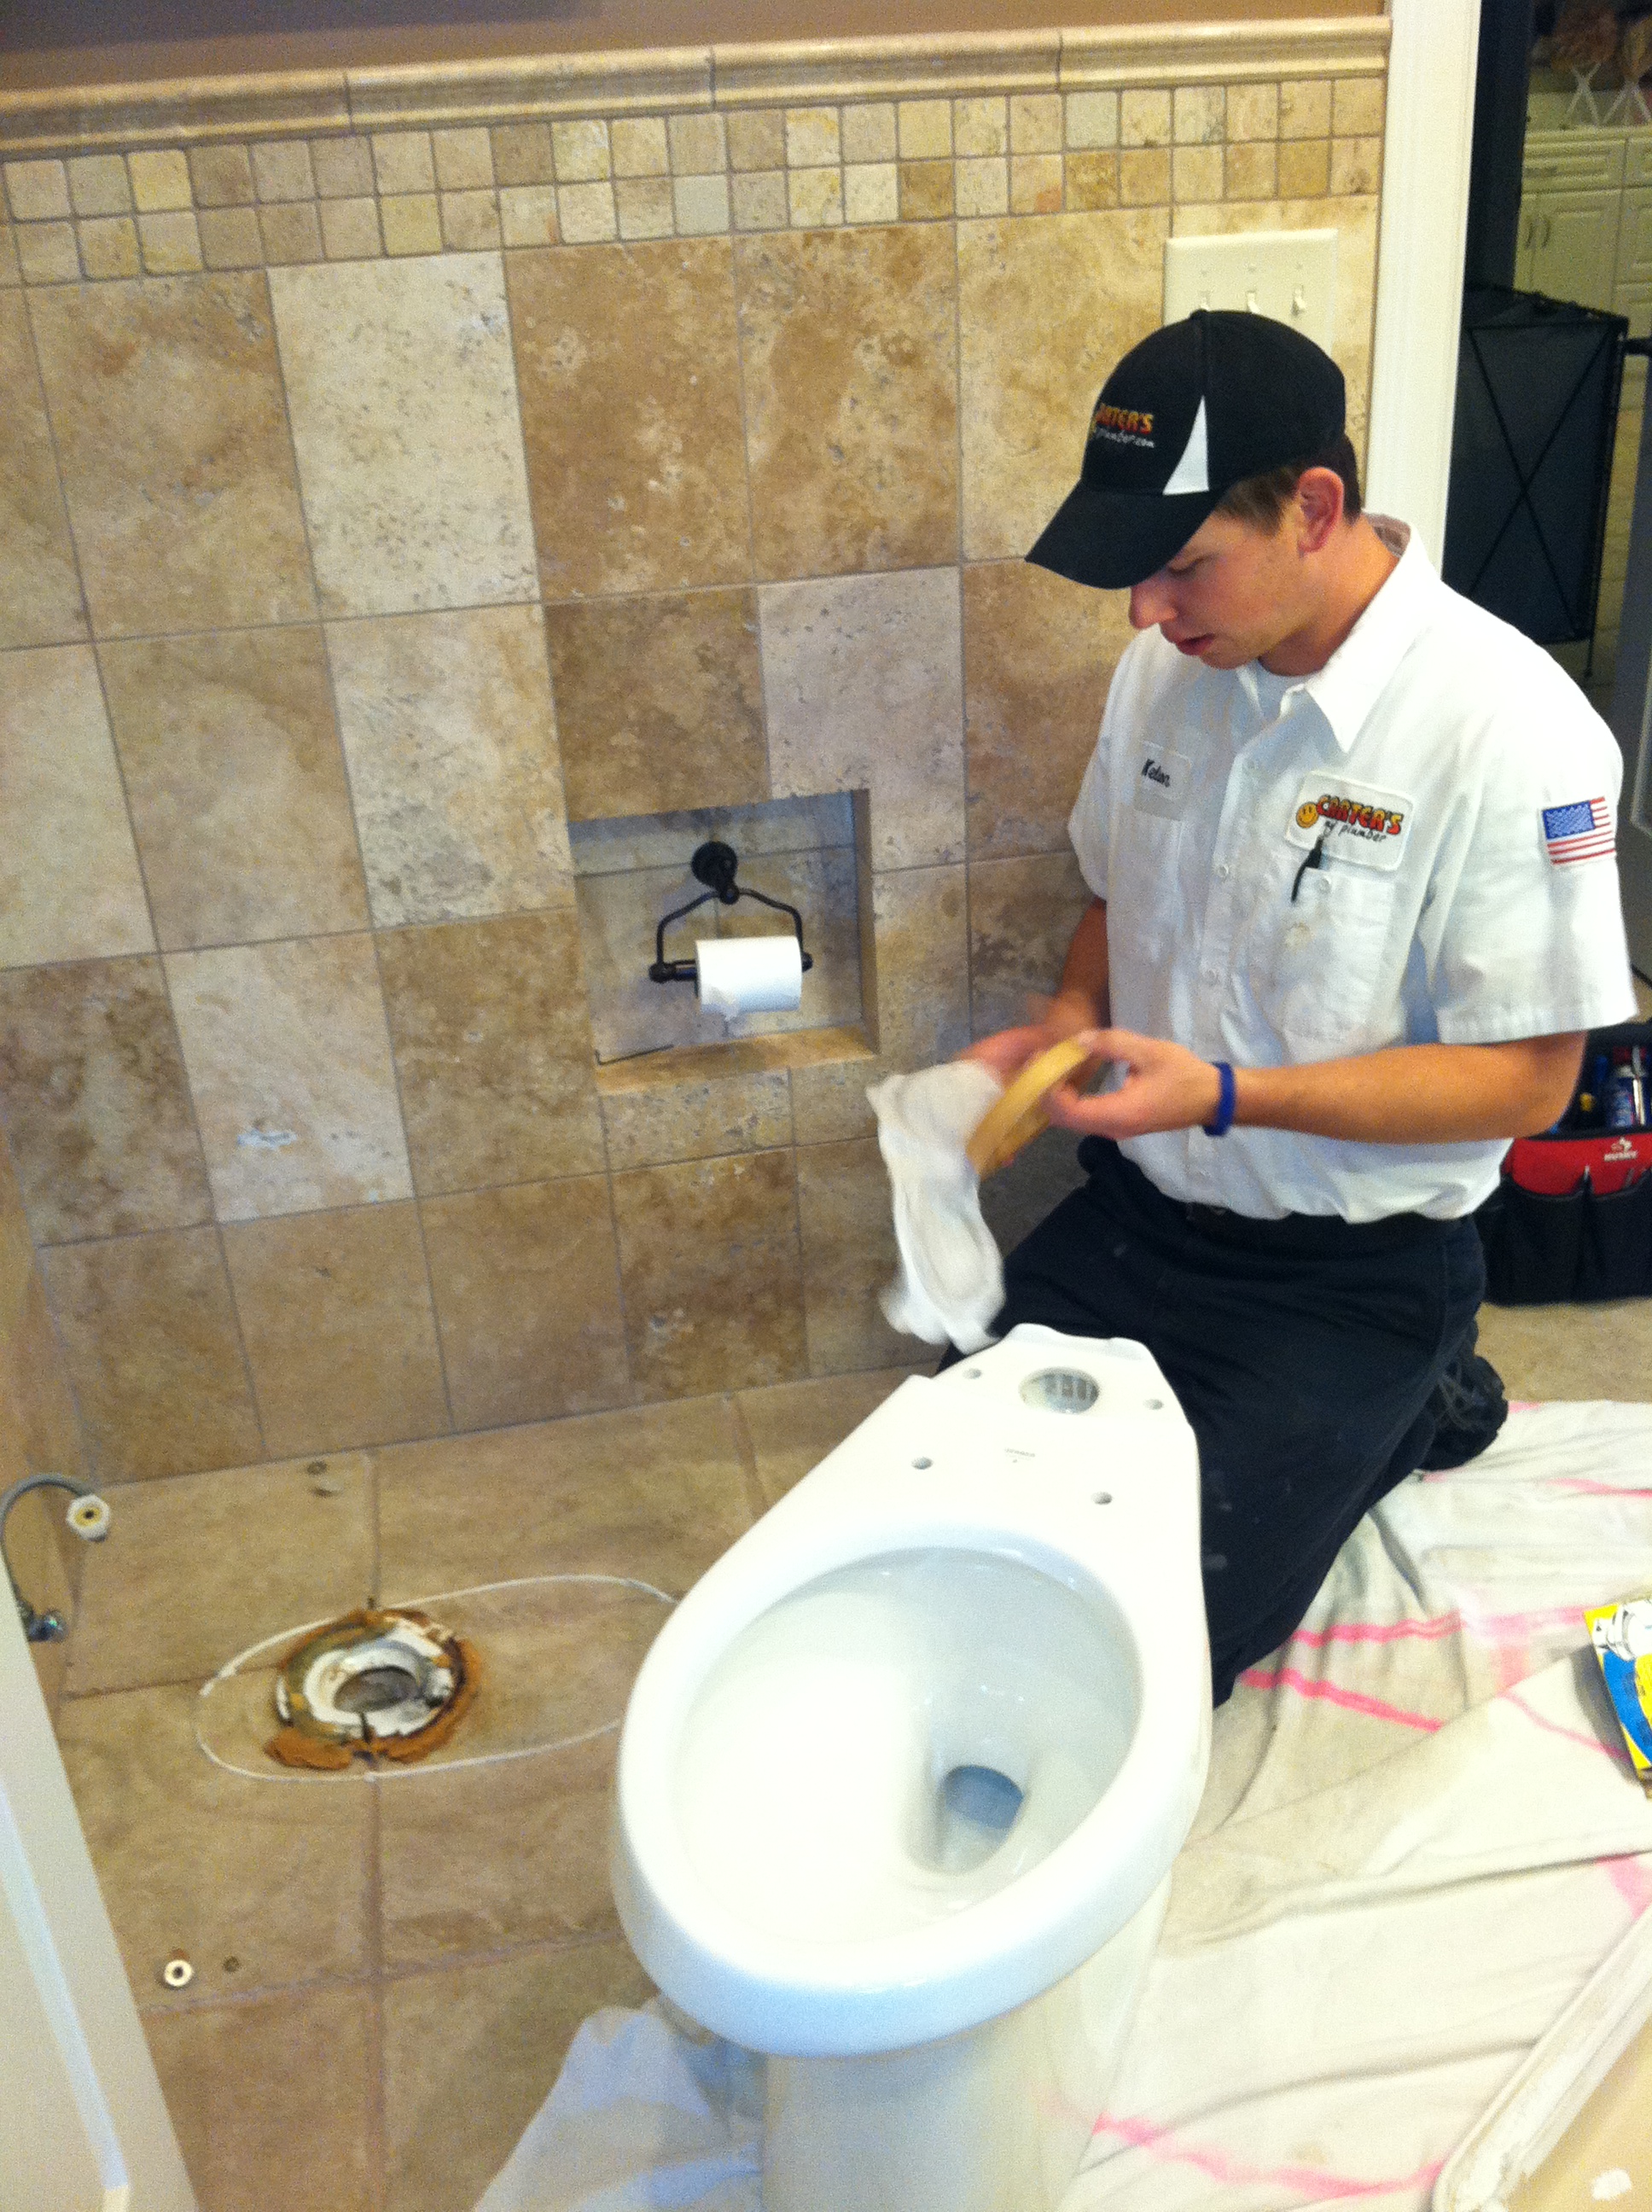 Kelson working on installing a new comfort height toilet